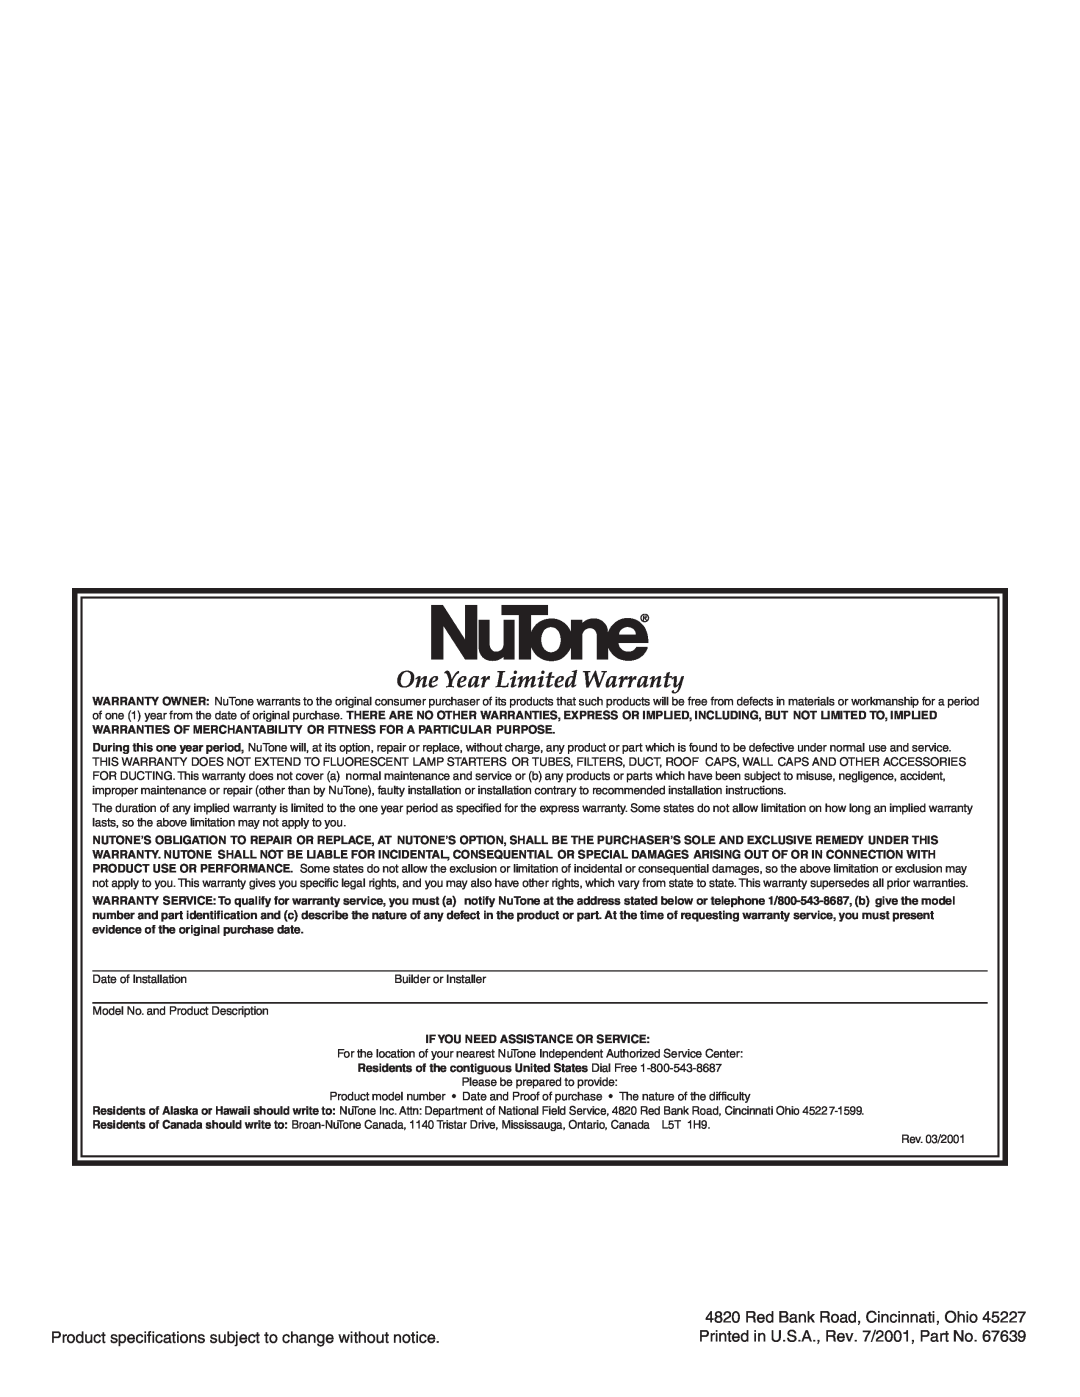 NuTone 8870 important safety instructions One Year Limited Warranty, Red Bank Road, Cincinnati, Ohio 